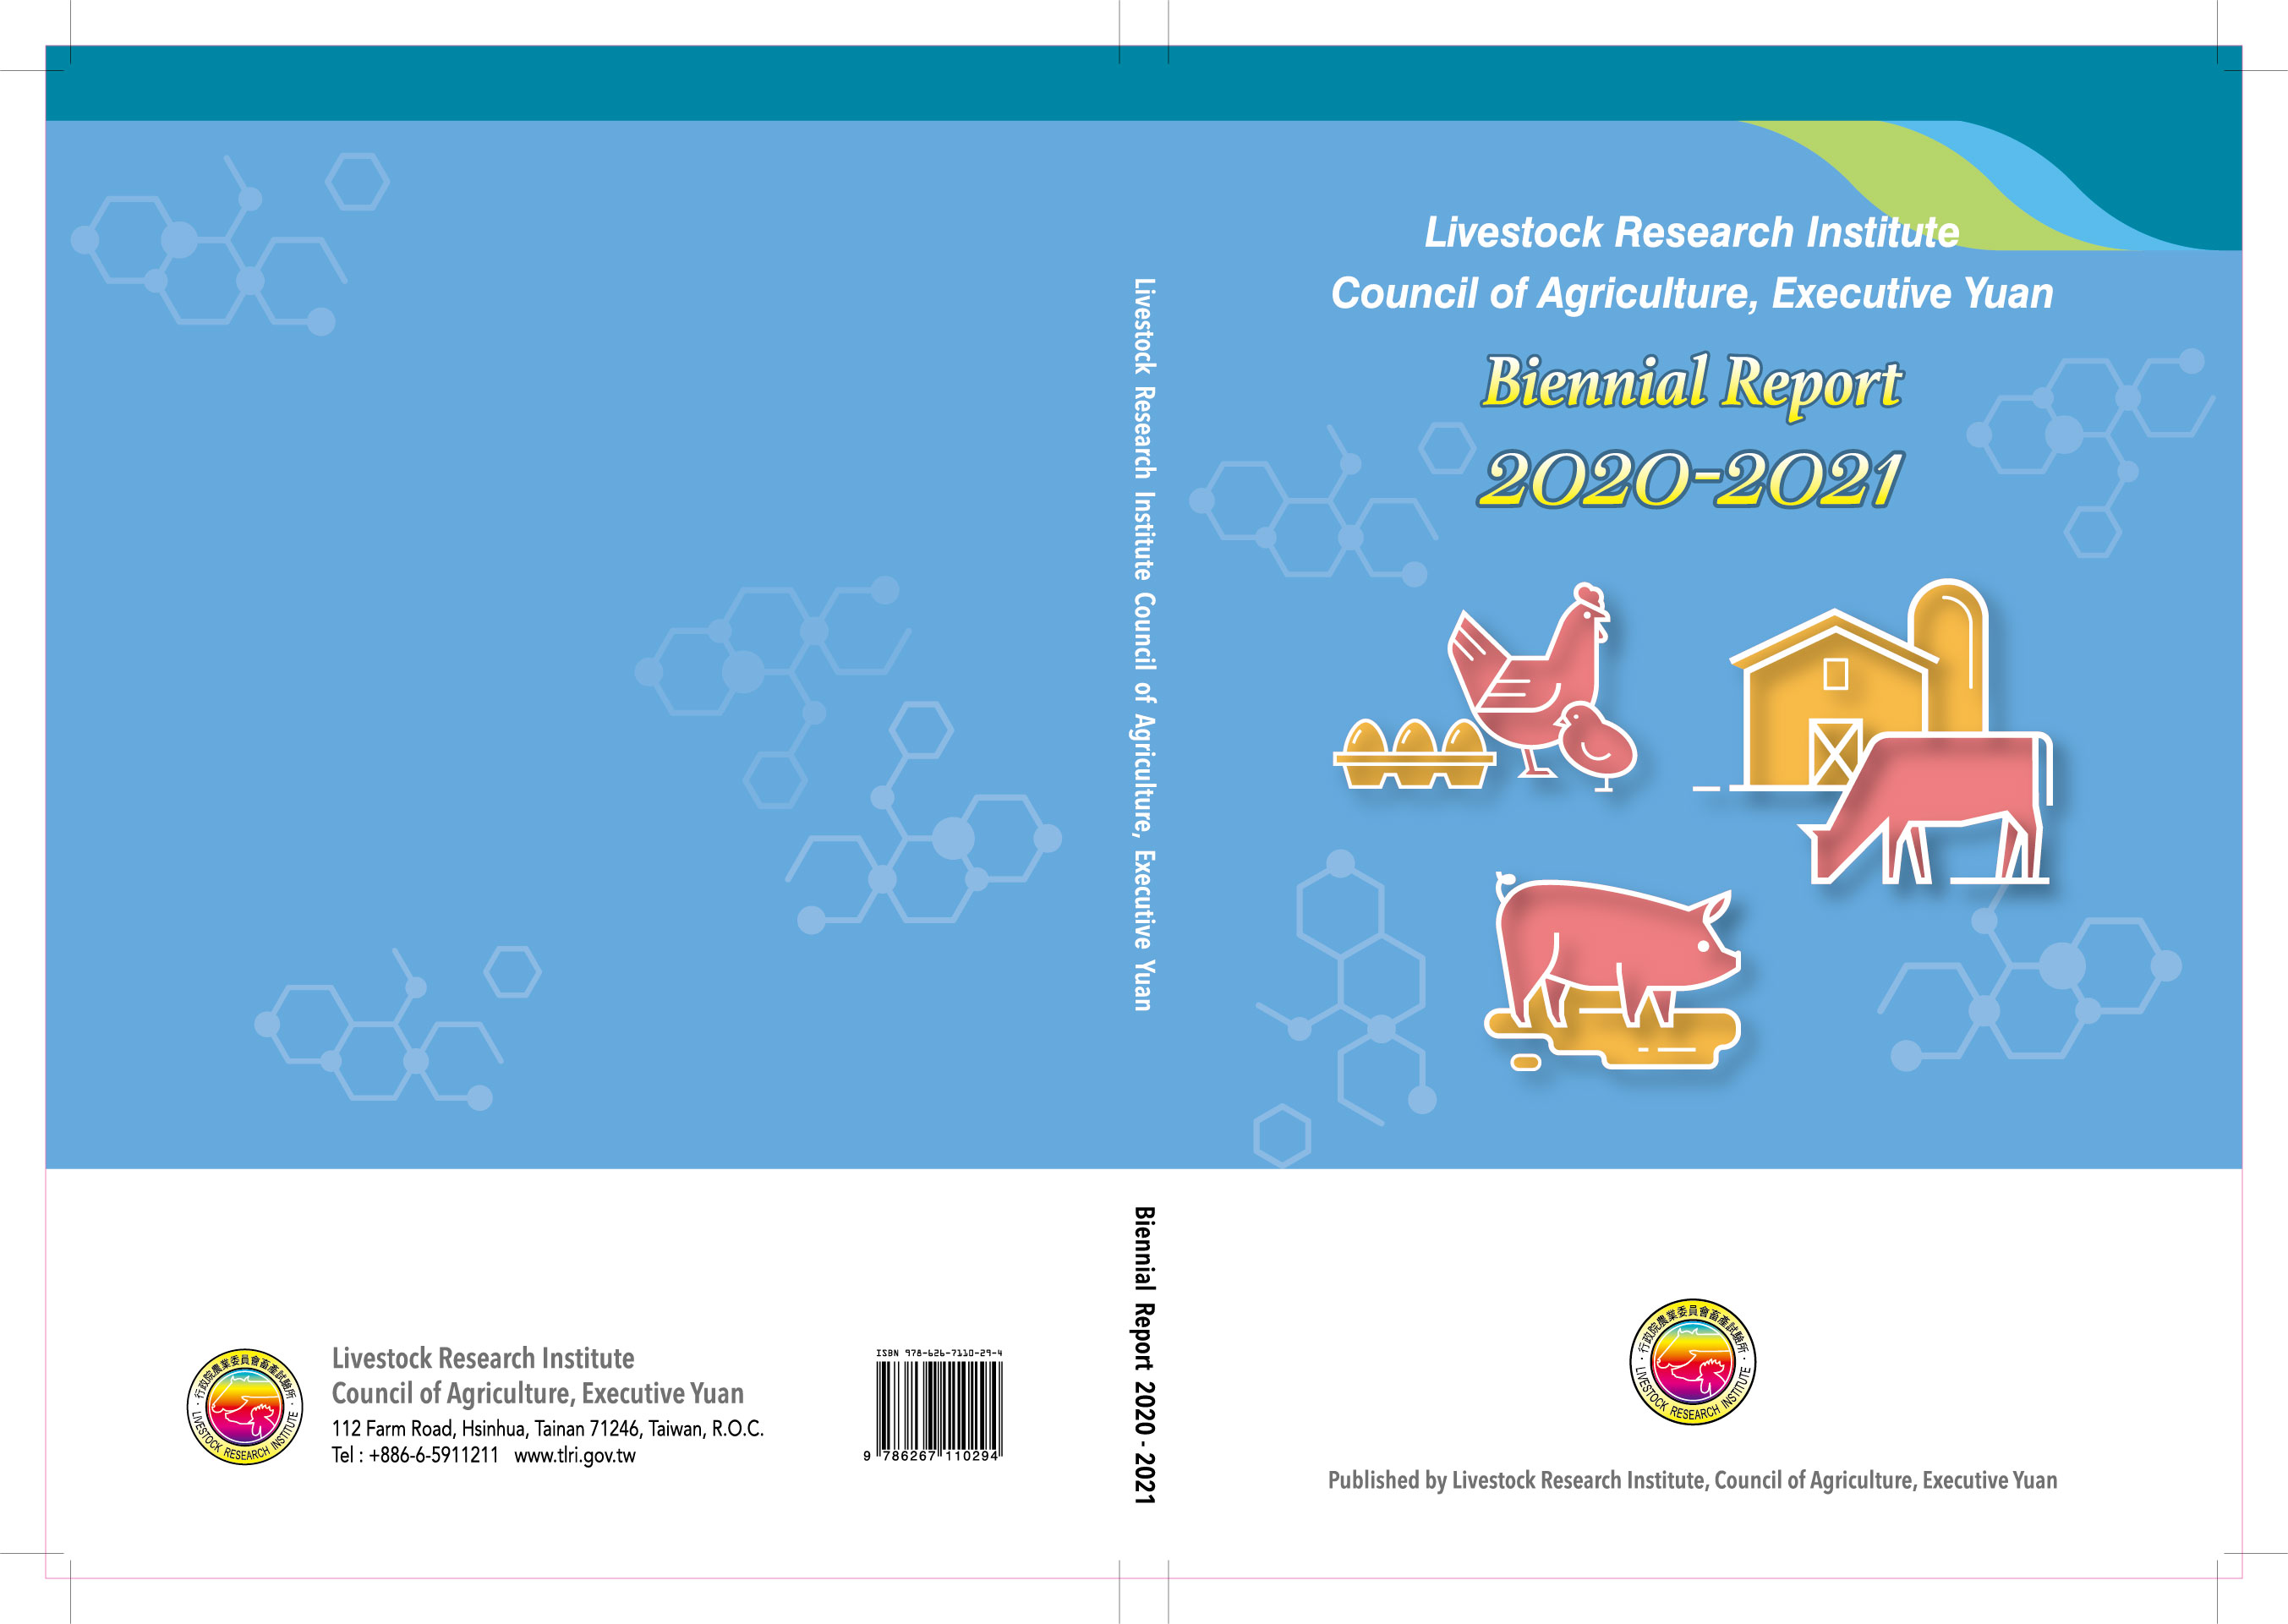 Livestock Research Institute, Council  of Agriculture, Executive Yuan, Biennial Report 2020-2021